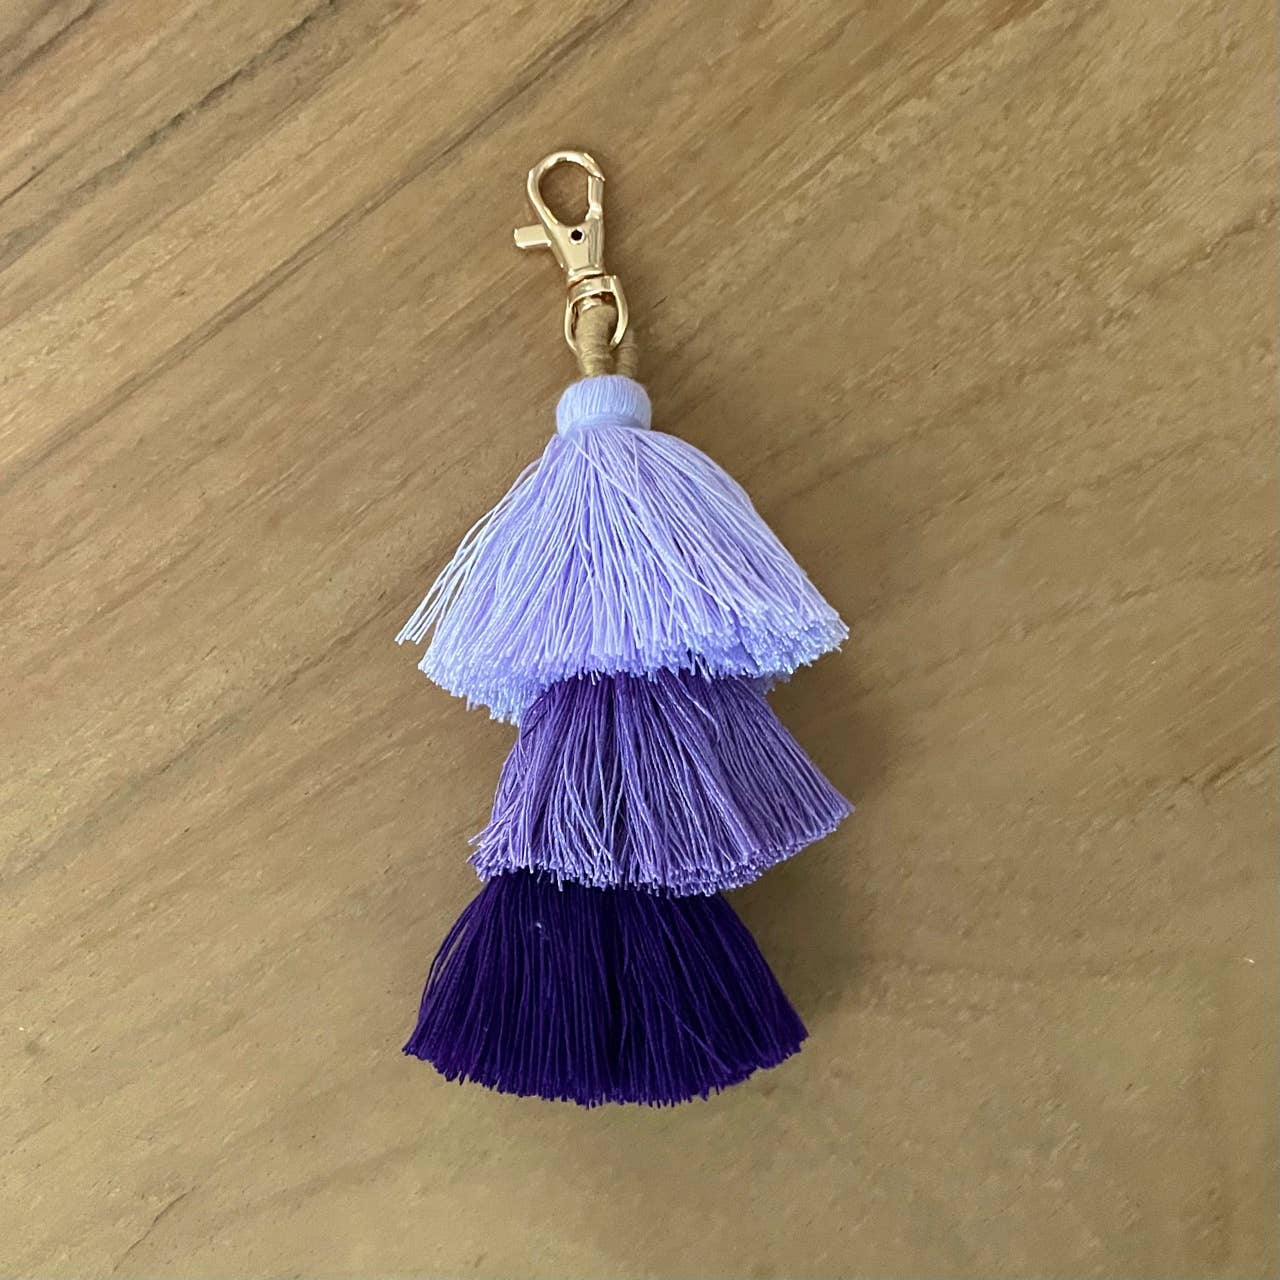 3 Tiered Ombre Tassel Charm